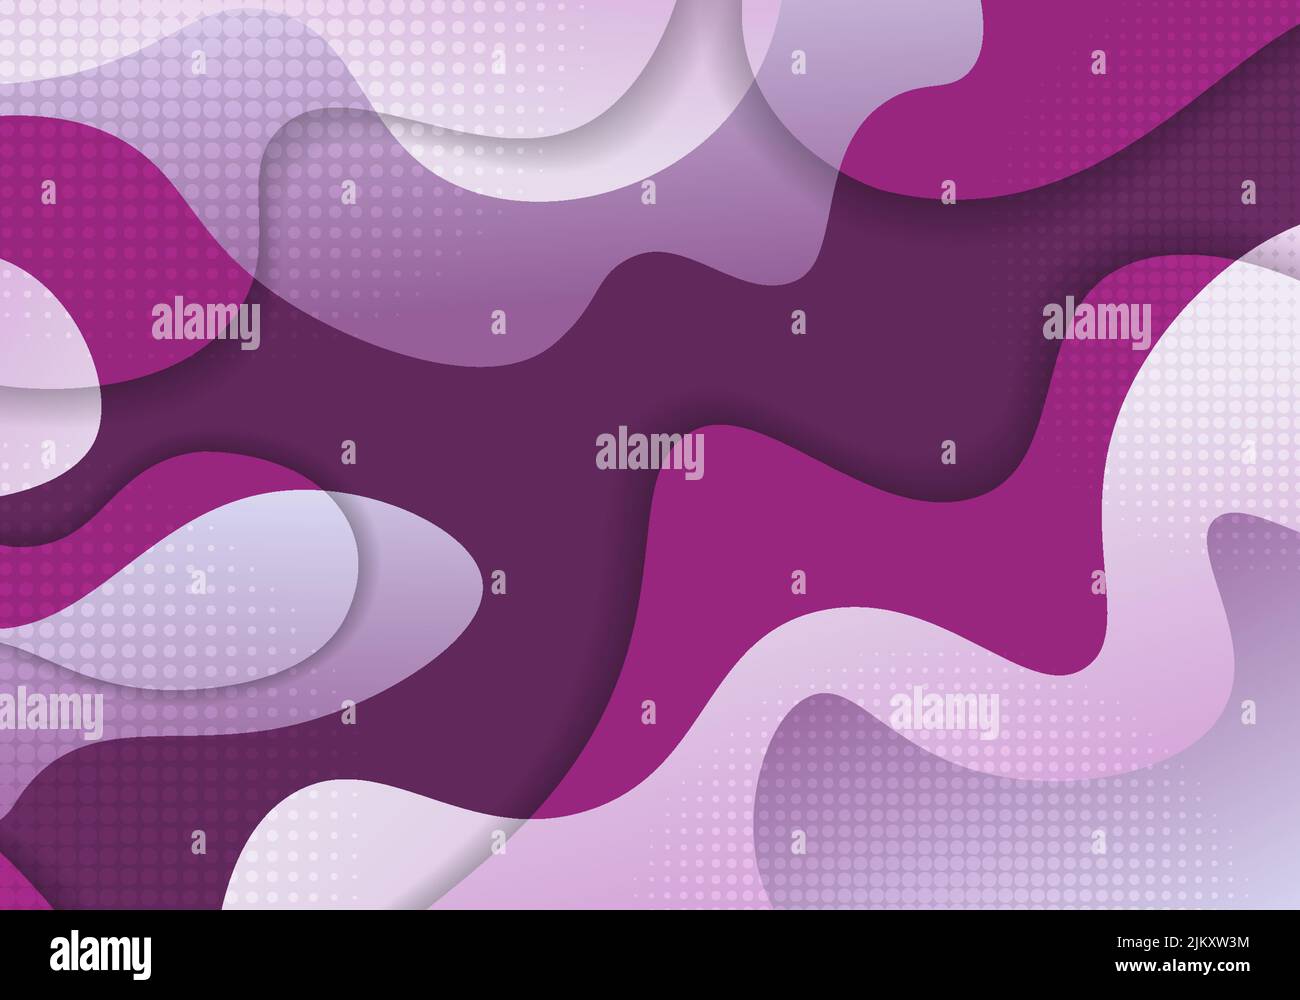 Abstract gradient purple color design decorative wavy artwork. Overlapping style with dots halftone background. Vector Stock Vector